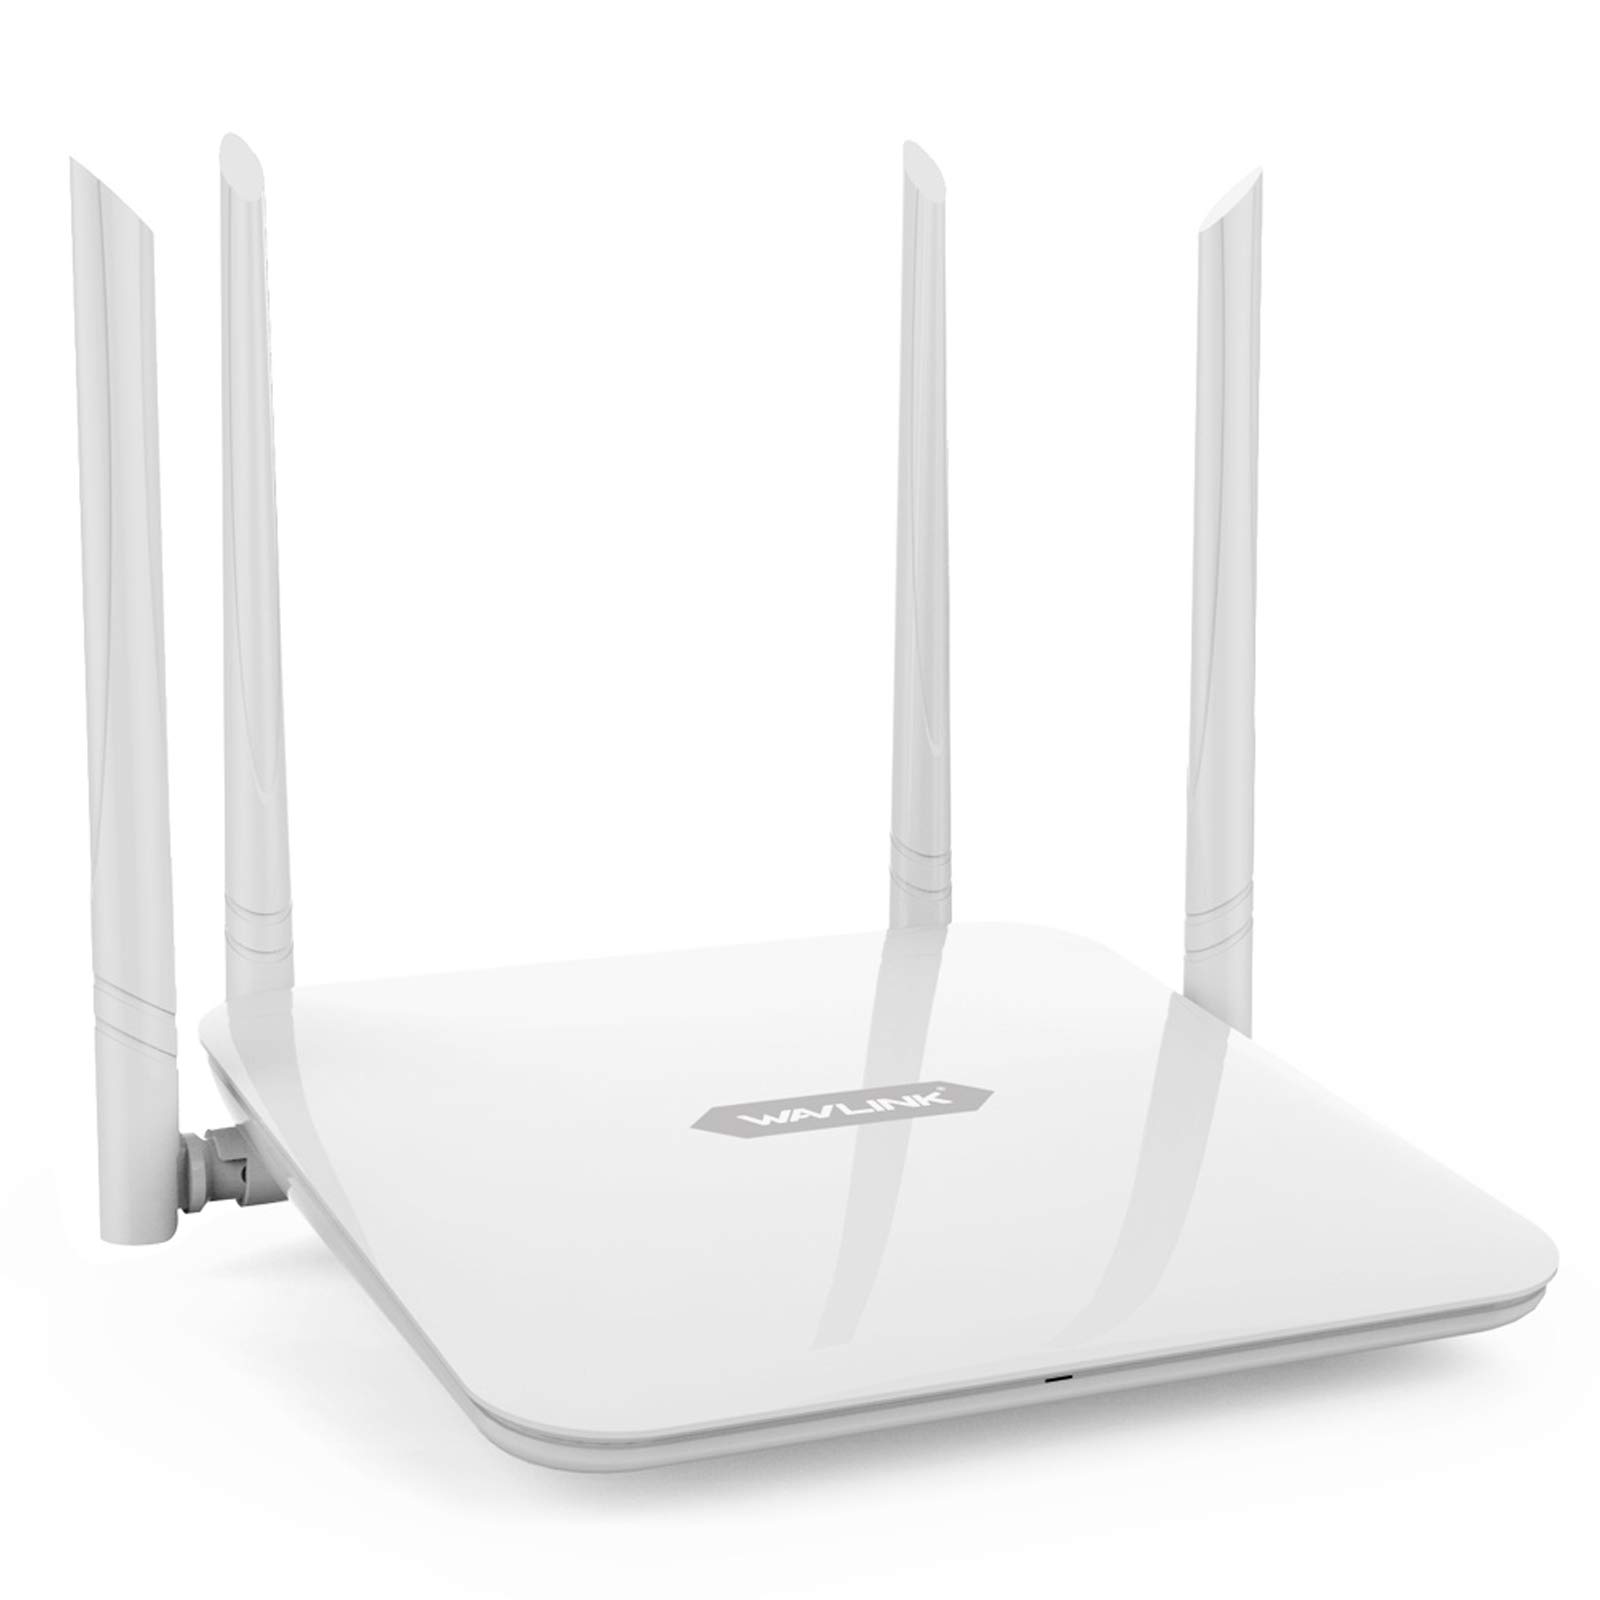 WiFi router settings page